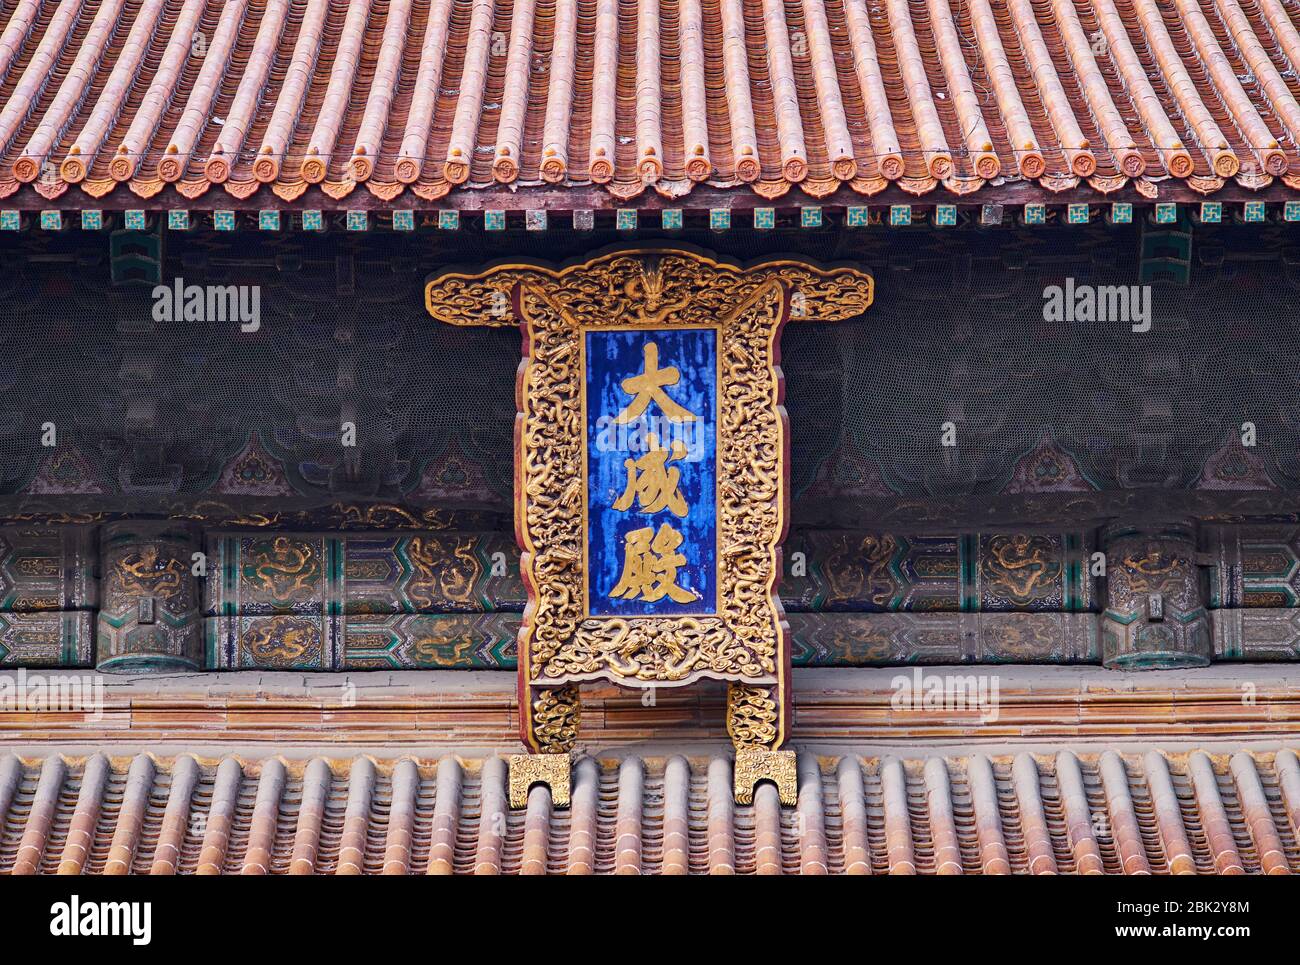 Roof details of the Hall of Great Perfection (Dacheng Hall) of the Confucius temple in Qufu, Shandong province, China. UNESCO World Heritage Site and Stock Photo